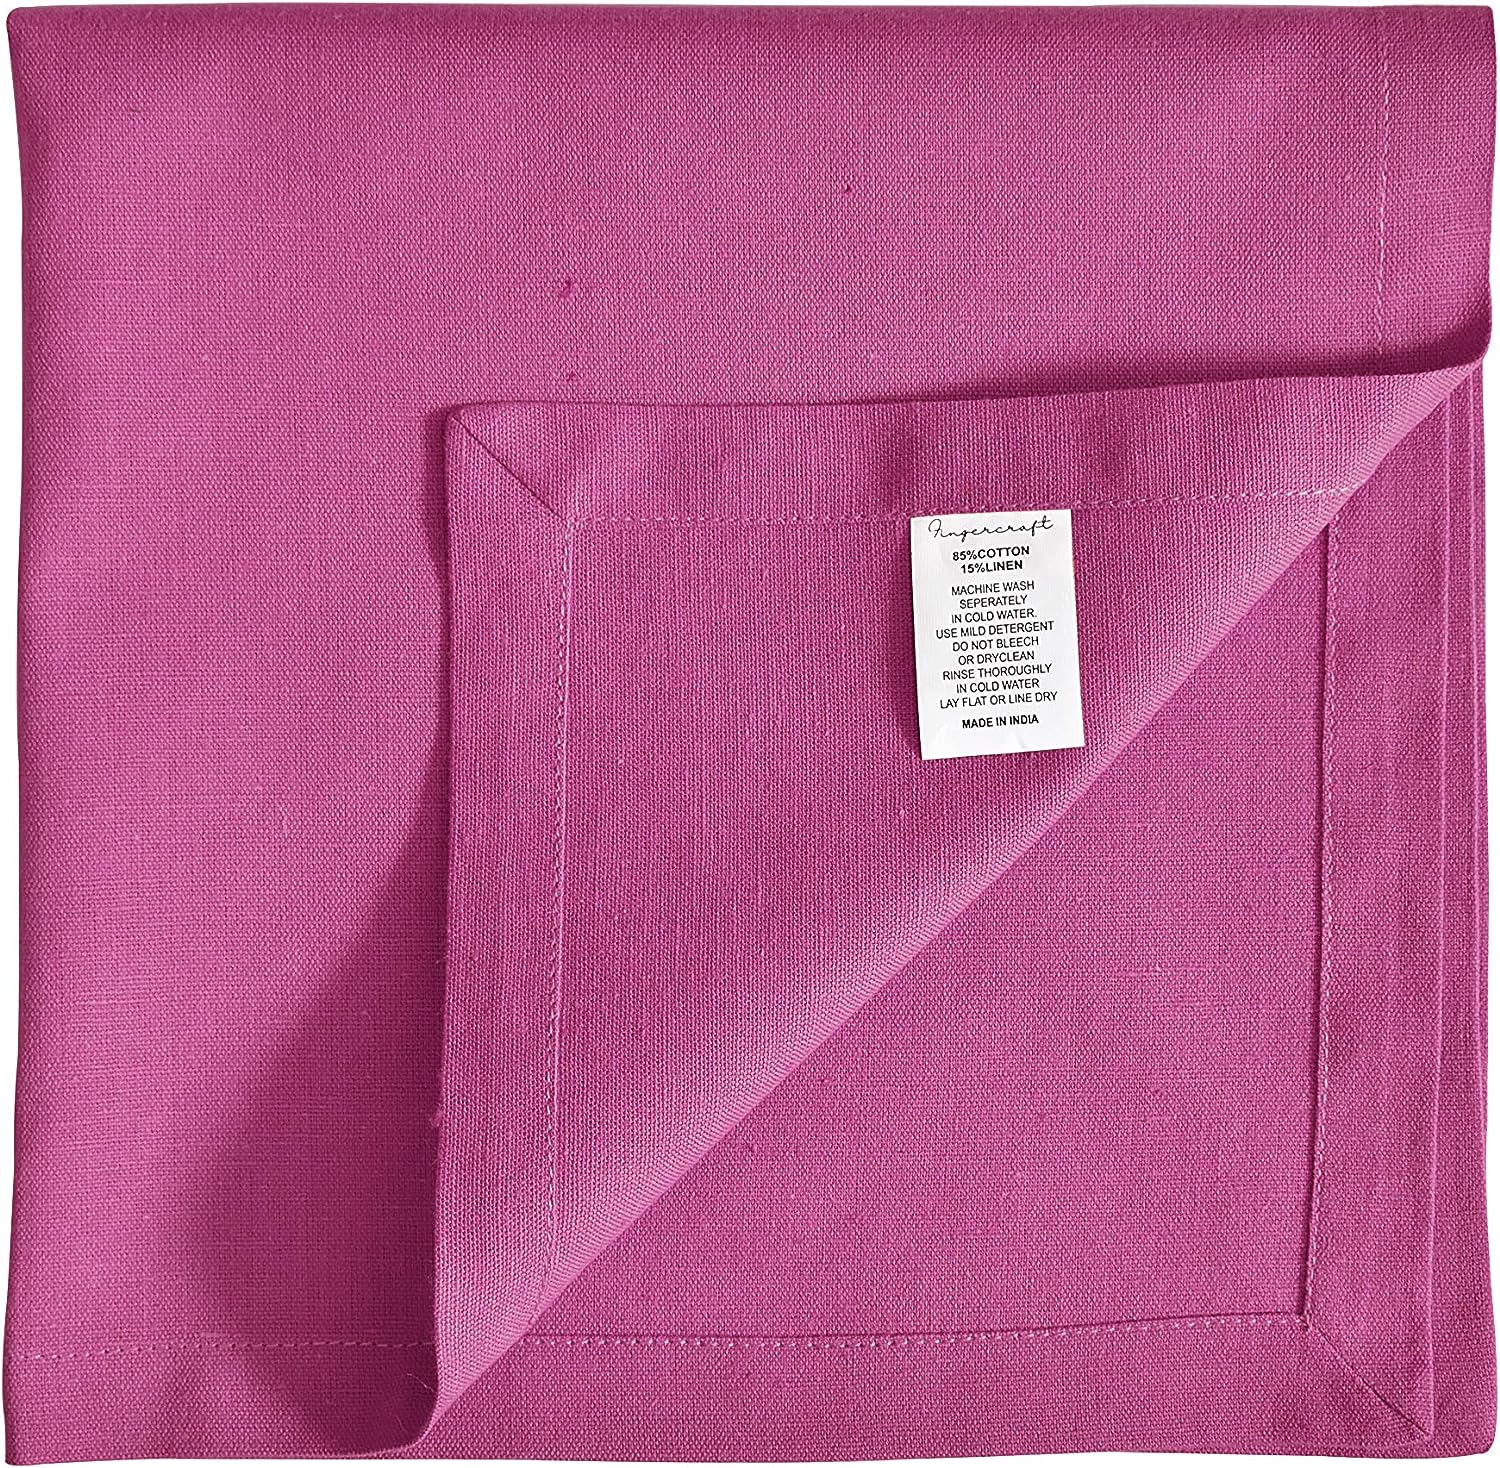 FINGERCRAFT Dinner Cloth Napkins, Cotton Linen Blend Fabric 12 Pack Easter Special, Premium Quality, Mitered Corners for Every Day Use Napkins are Pre Shrunk and Good Absorbency Magenta 6